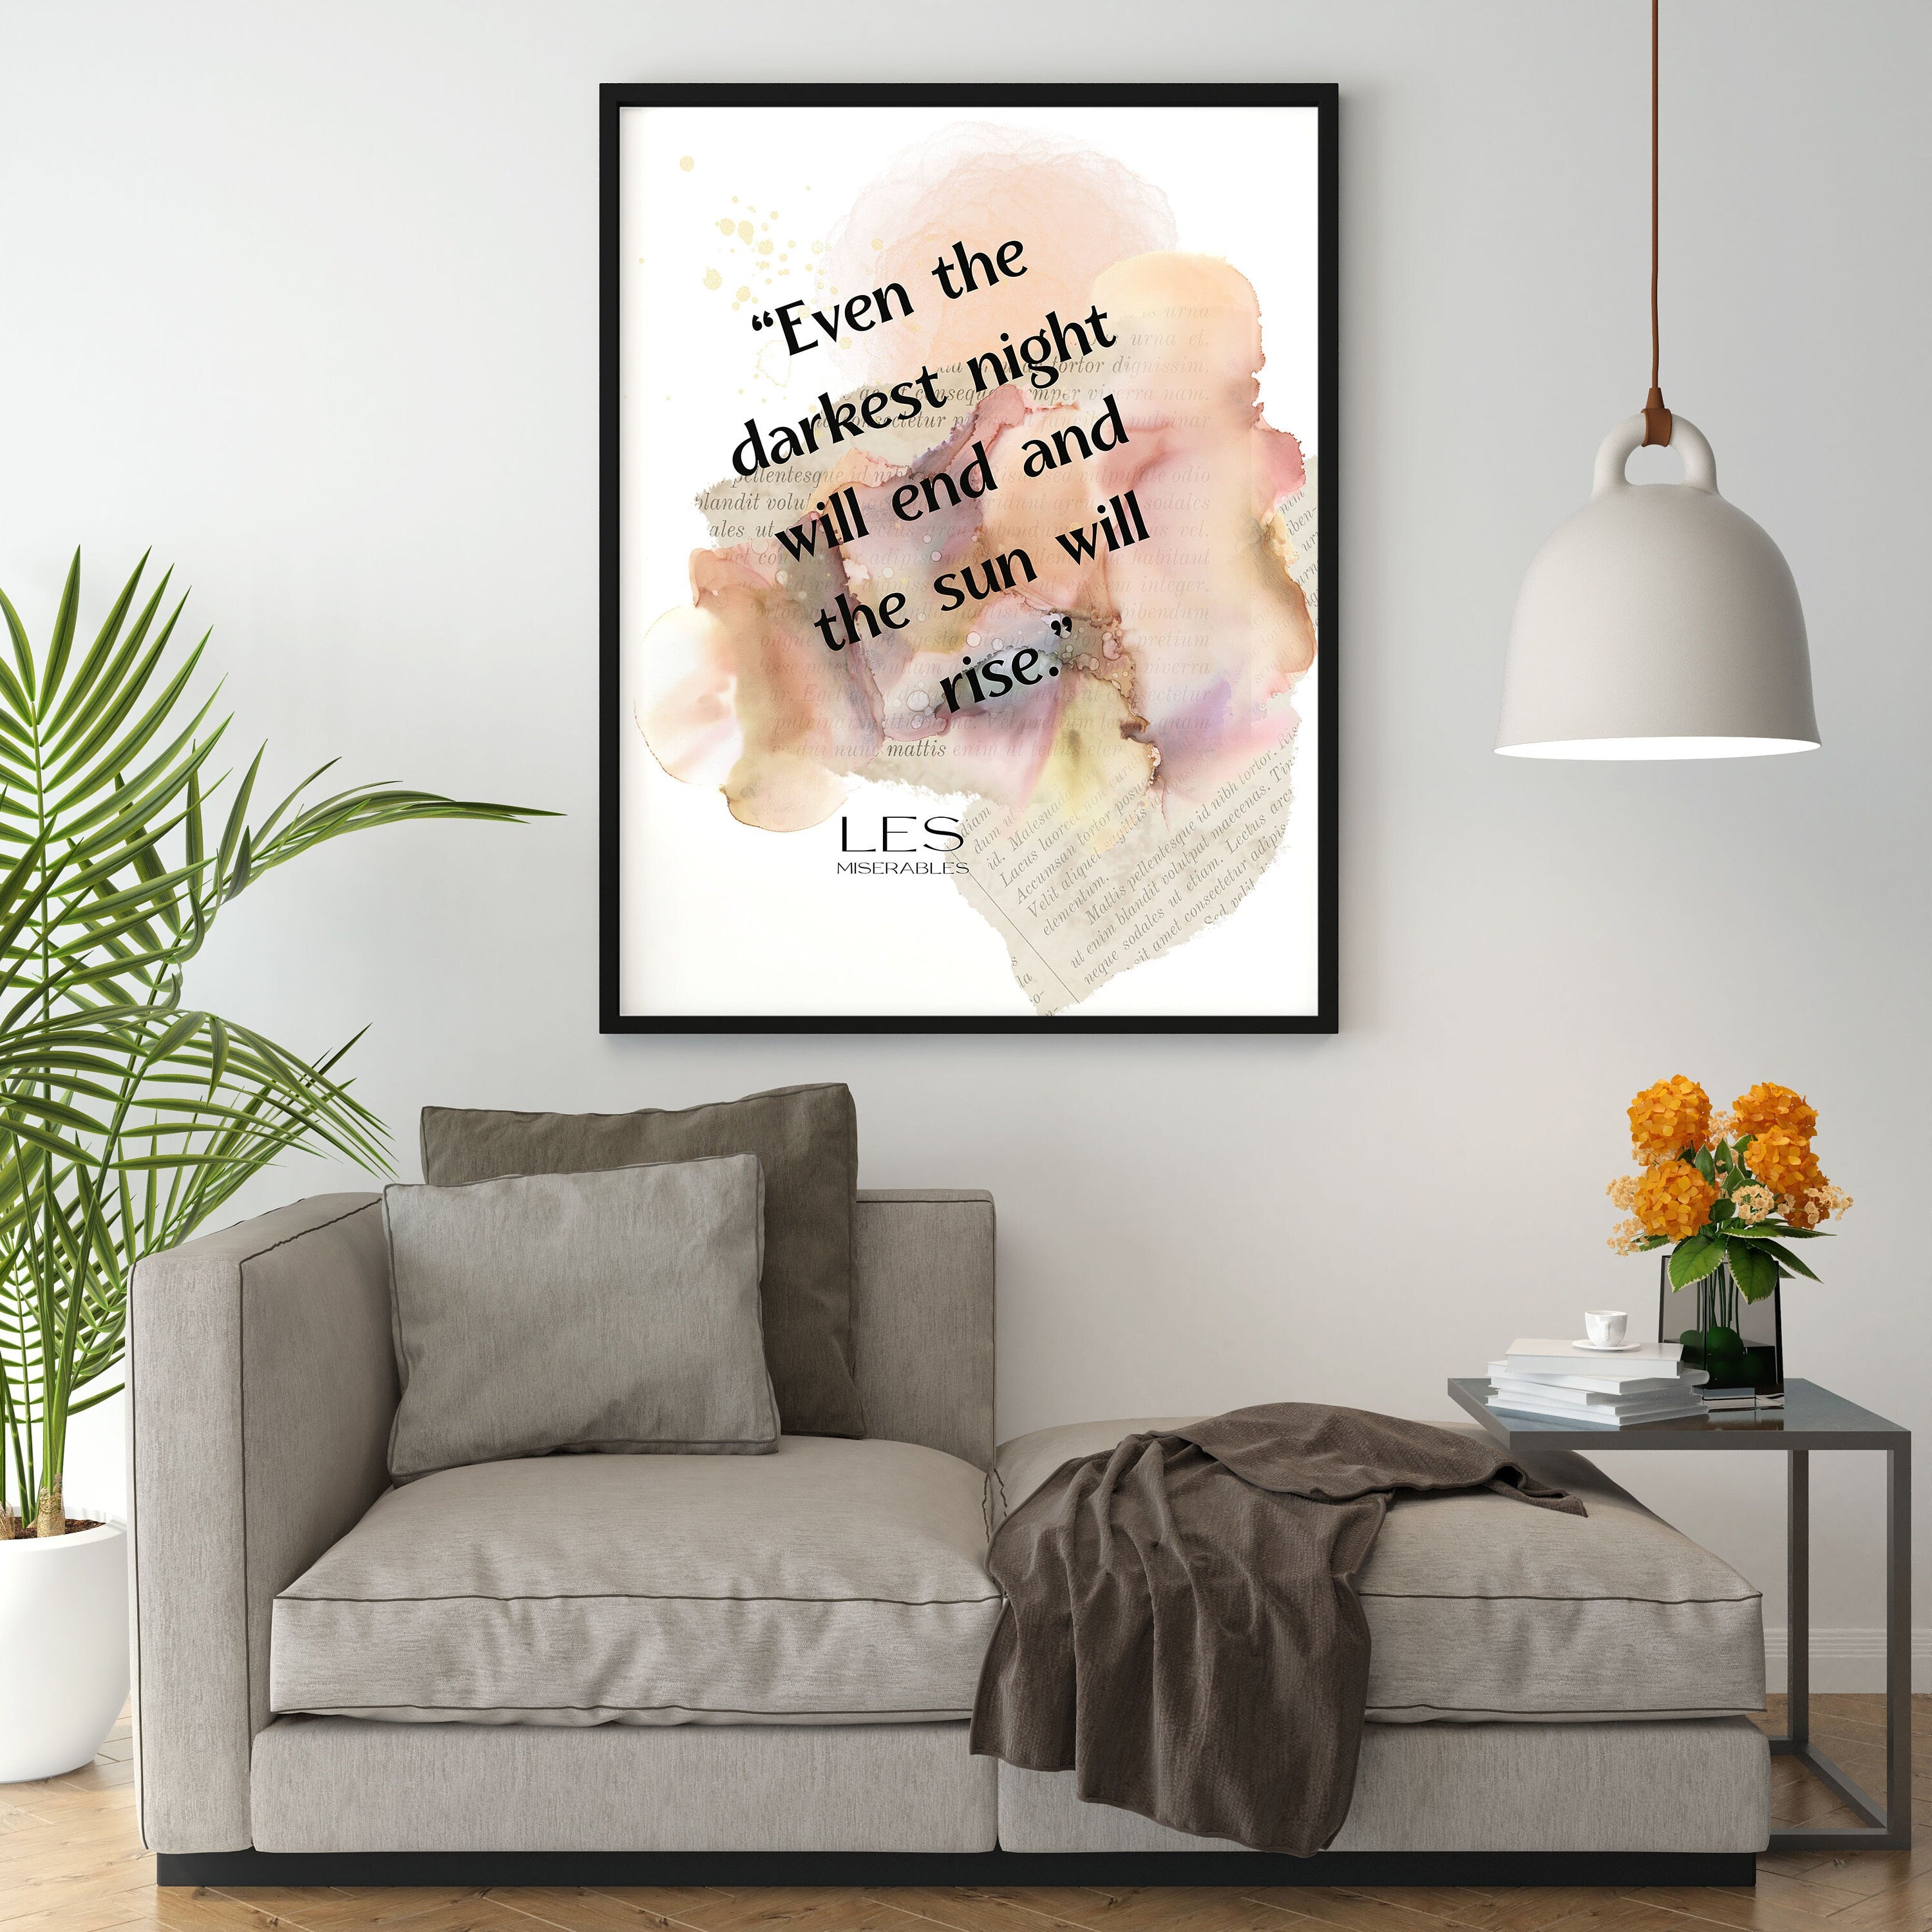 Les Miserable Quote Print Even The Darkest Night Will End, Victor Hugo Inspirational Quote Wall Art Prints Framed or Unframed